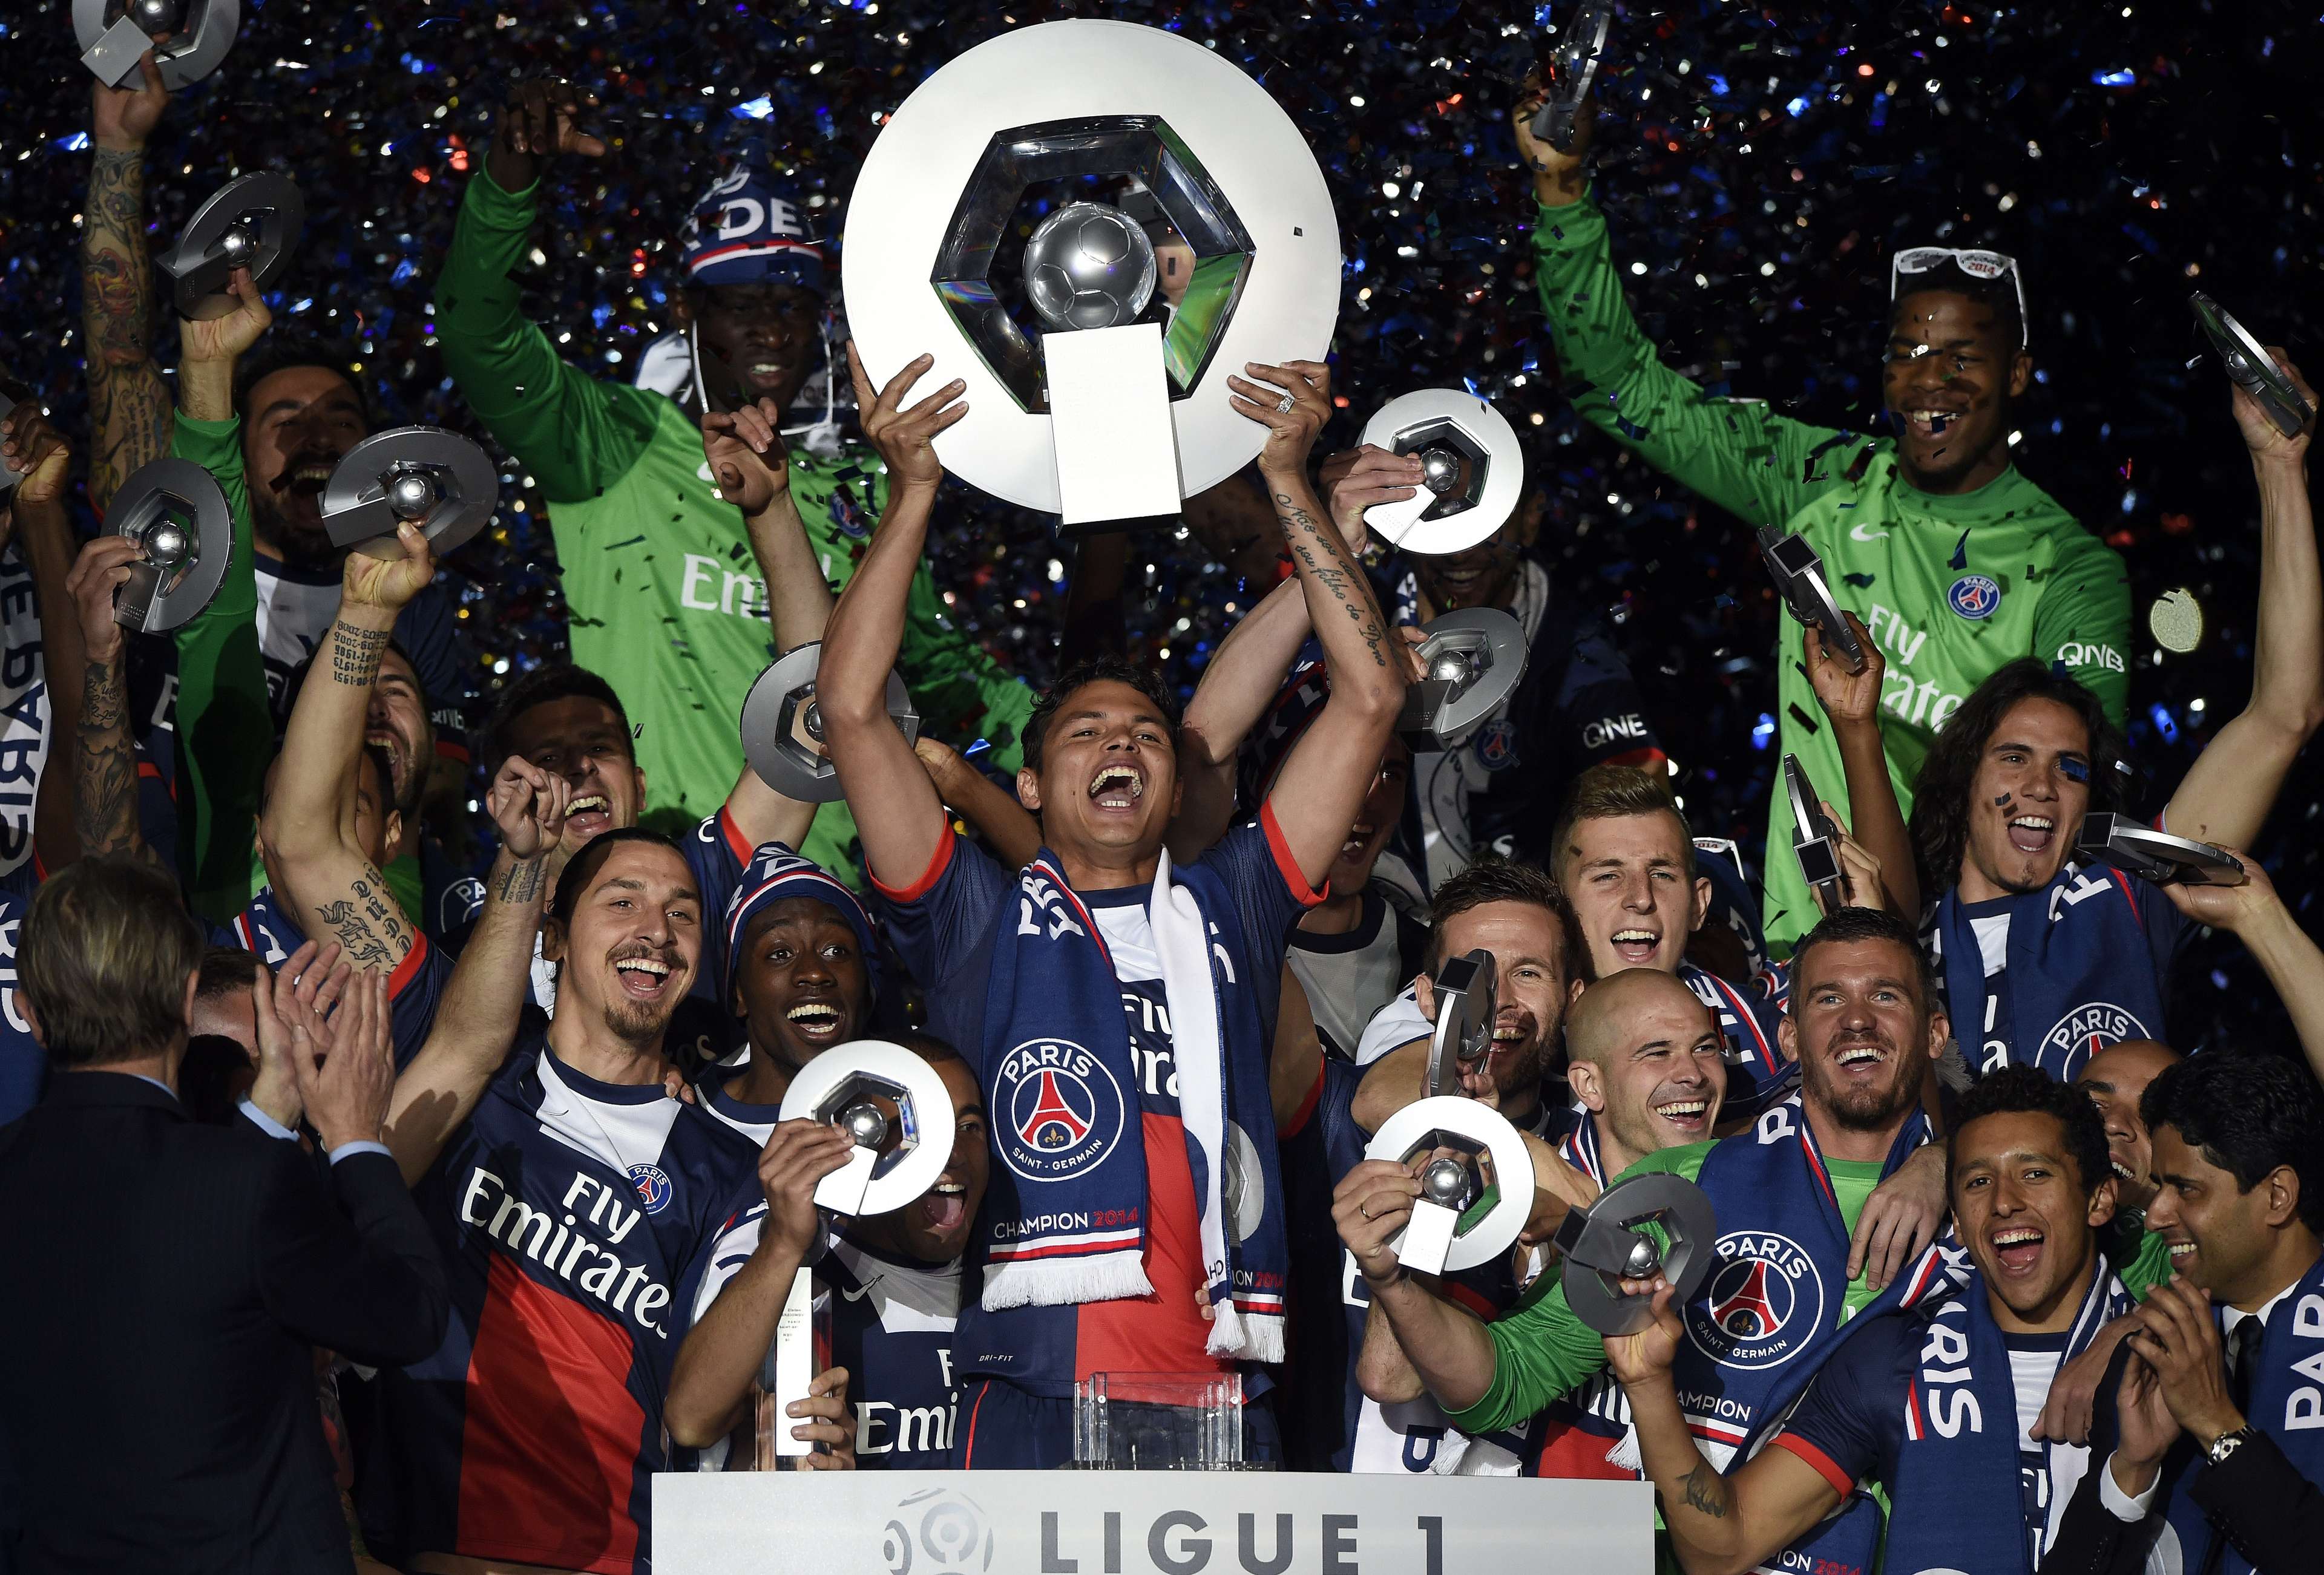 PSG French Ligue 1 Champions 2014